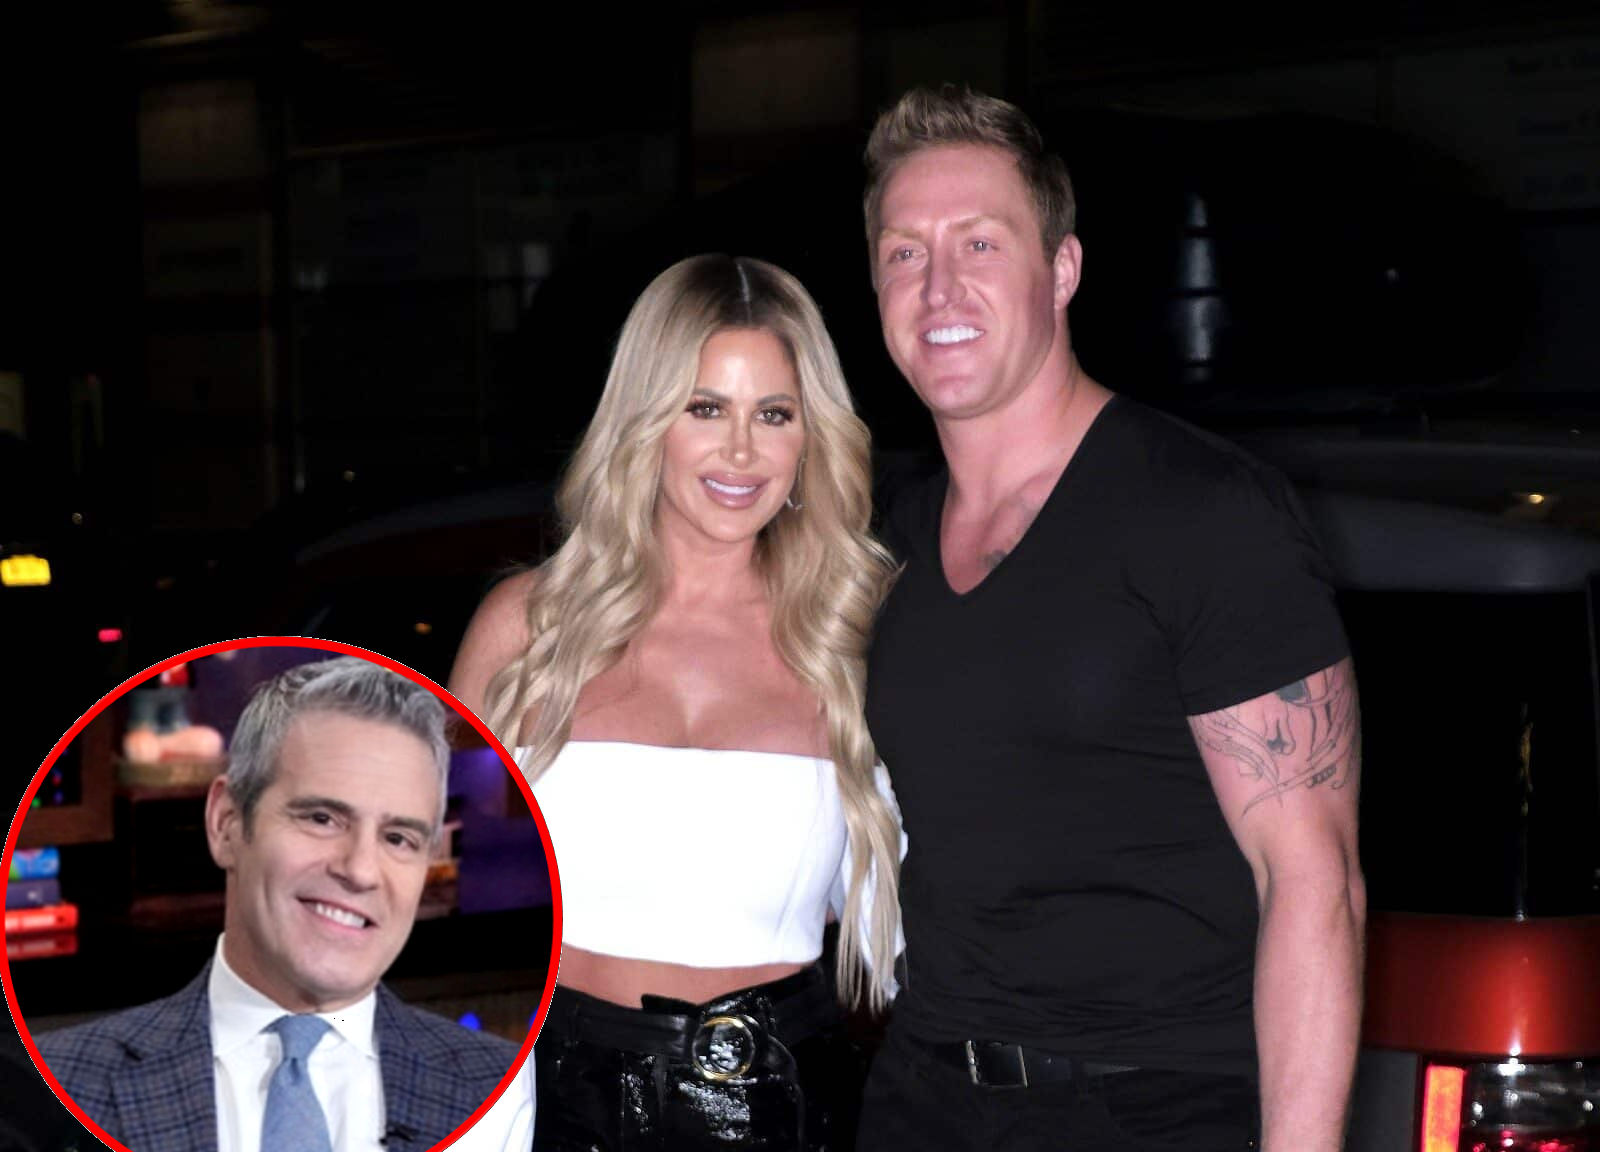 Kim Zolciak and Kroy Biermann Hit With Second Tax Lien as Amount Revealed, Plus Andy Cohen Recalls Being "Worried" About Kim's Spending Habits